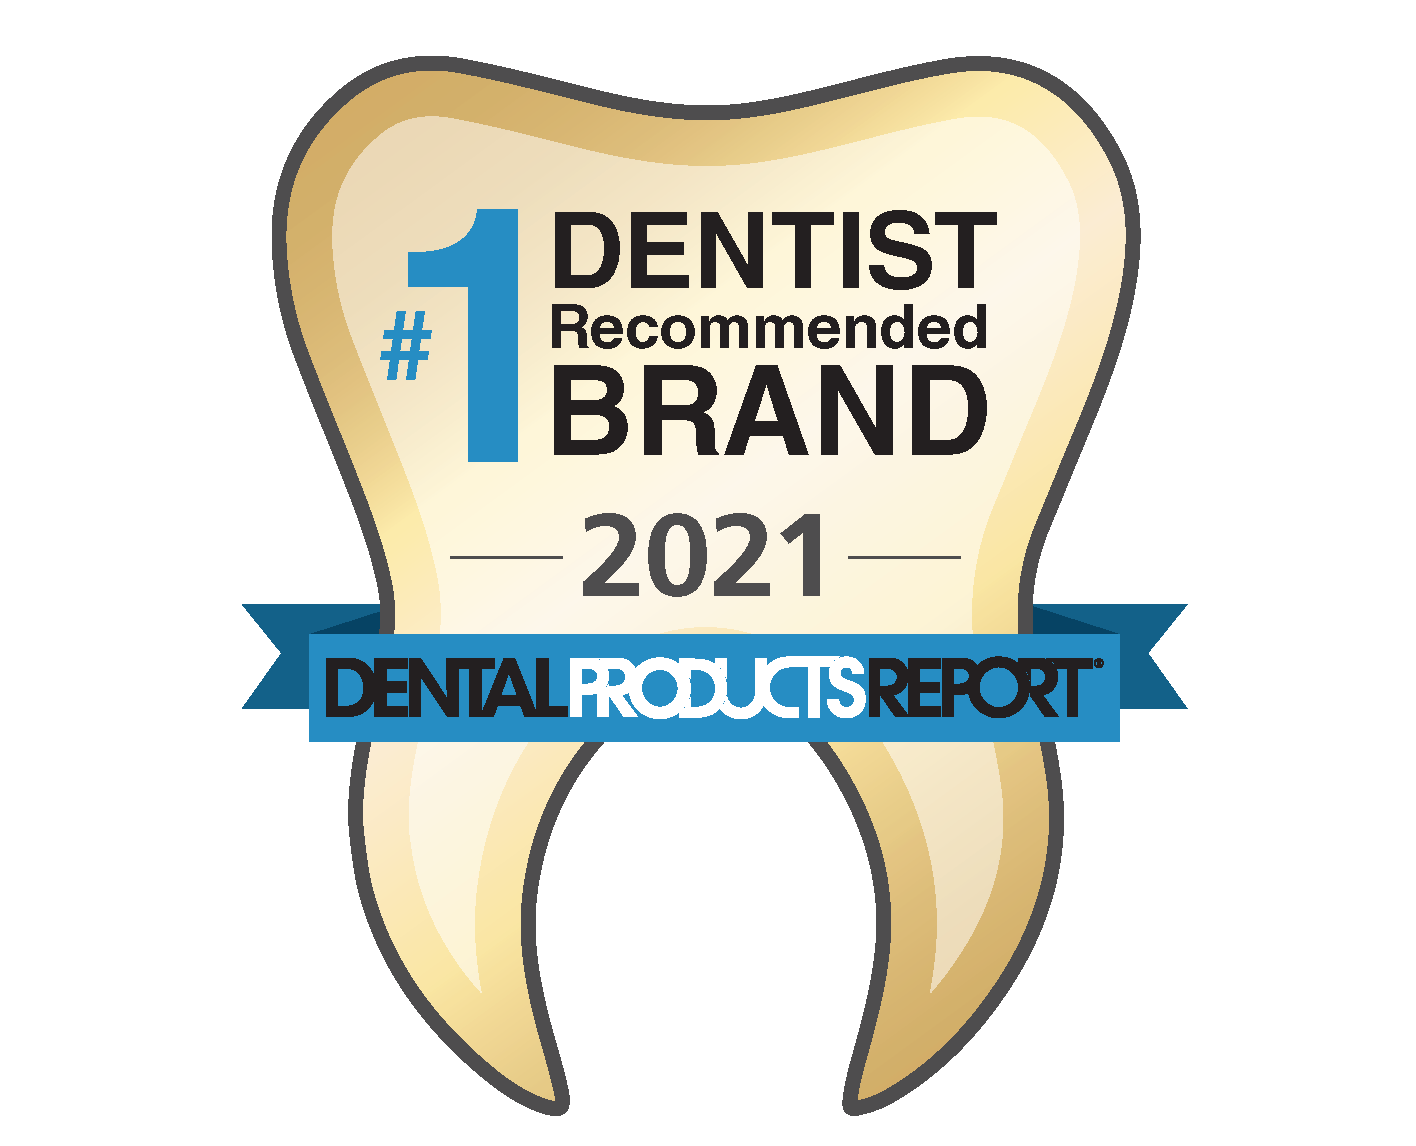 #1 Dentist Recommended Brand 2021